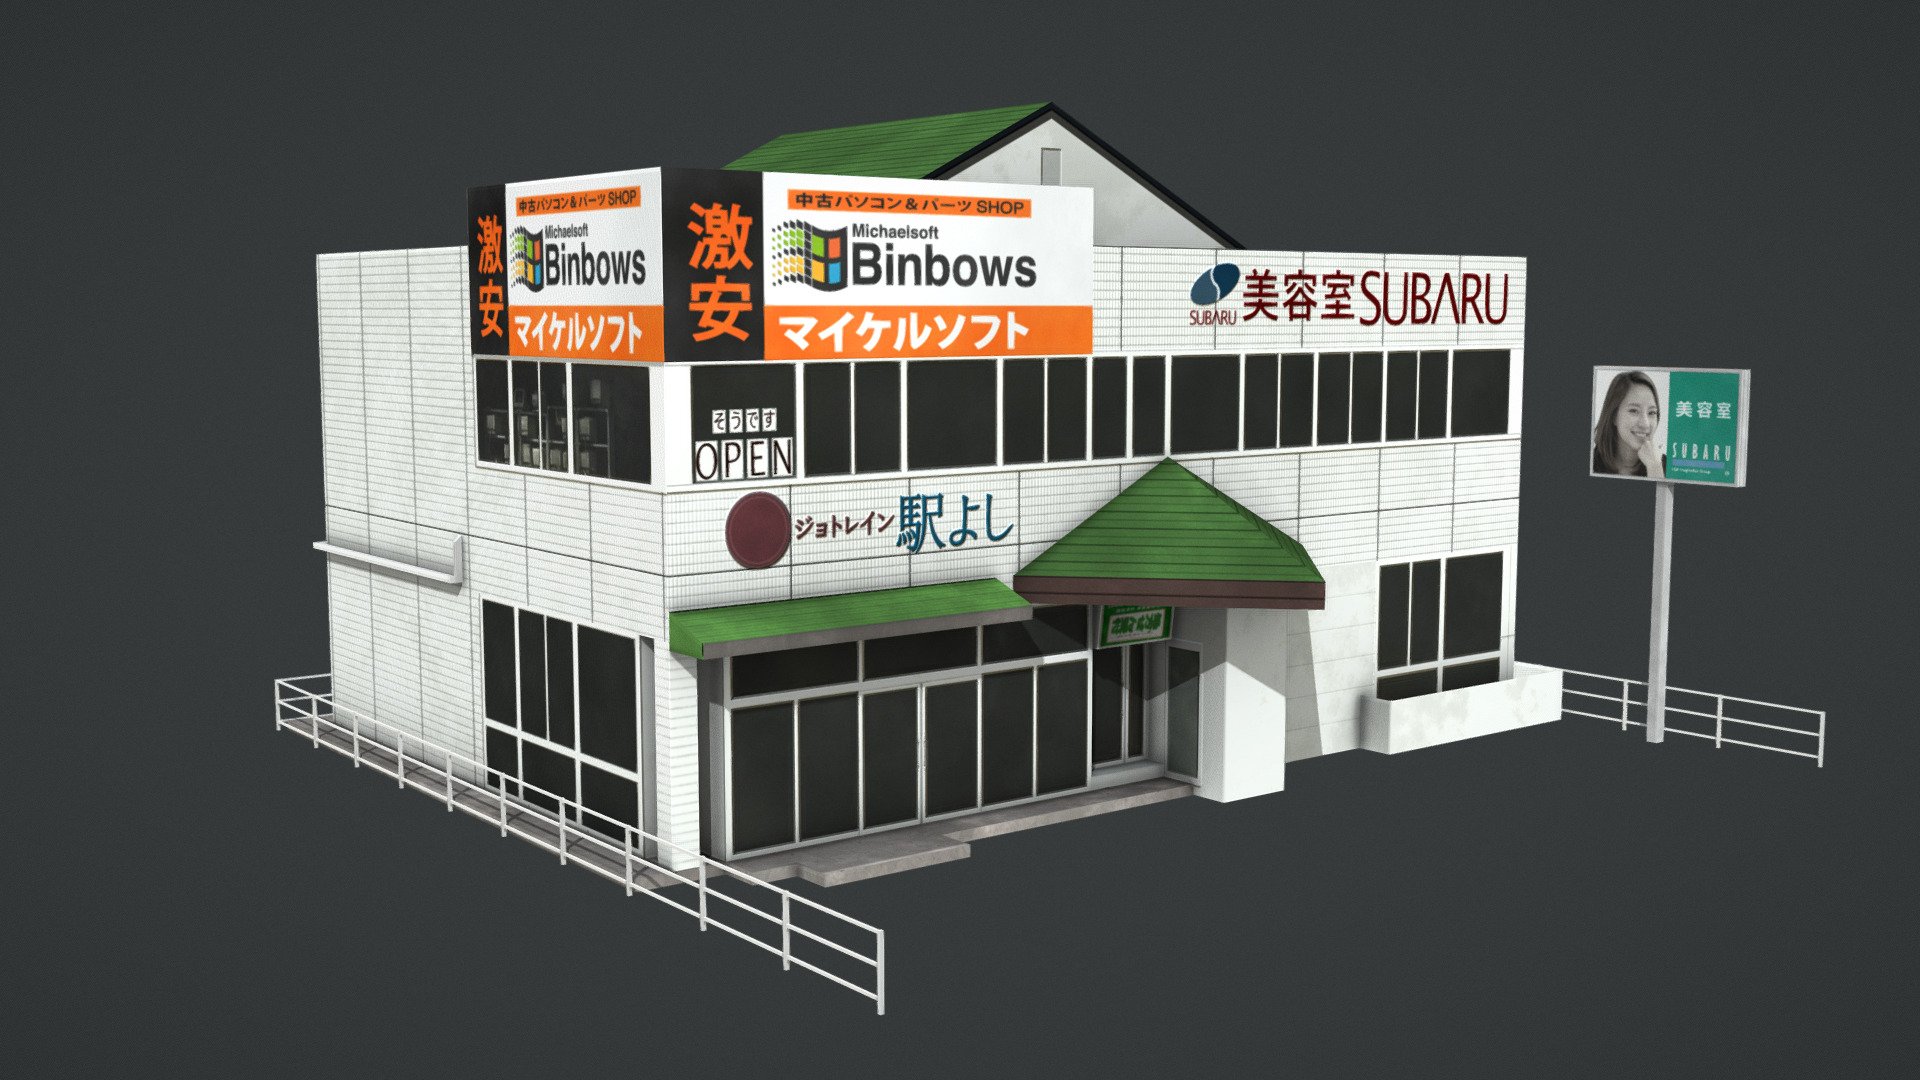 This asset is a replica of the Michaelsoft Binbows store intended for Cities Skylines.
https://steamcommunity.com/sharedfiles/filedetails/?id=2842768620

&ldquo;Michaelsoft Binbows